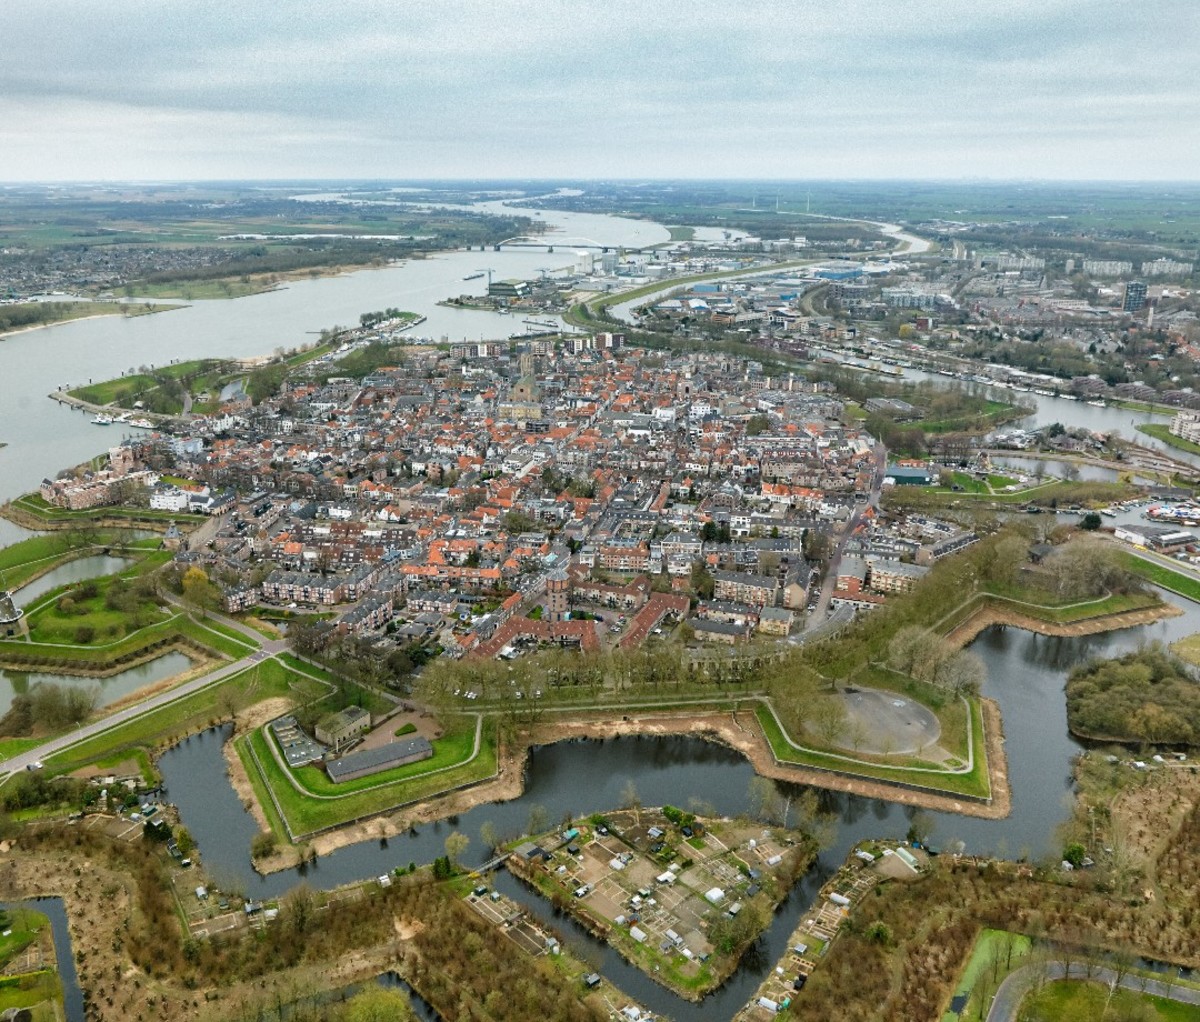 An aerial view of a fort surrounded by water in The Netherlands.